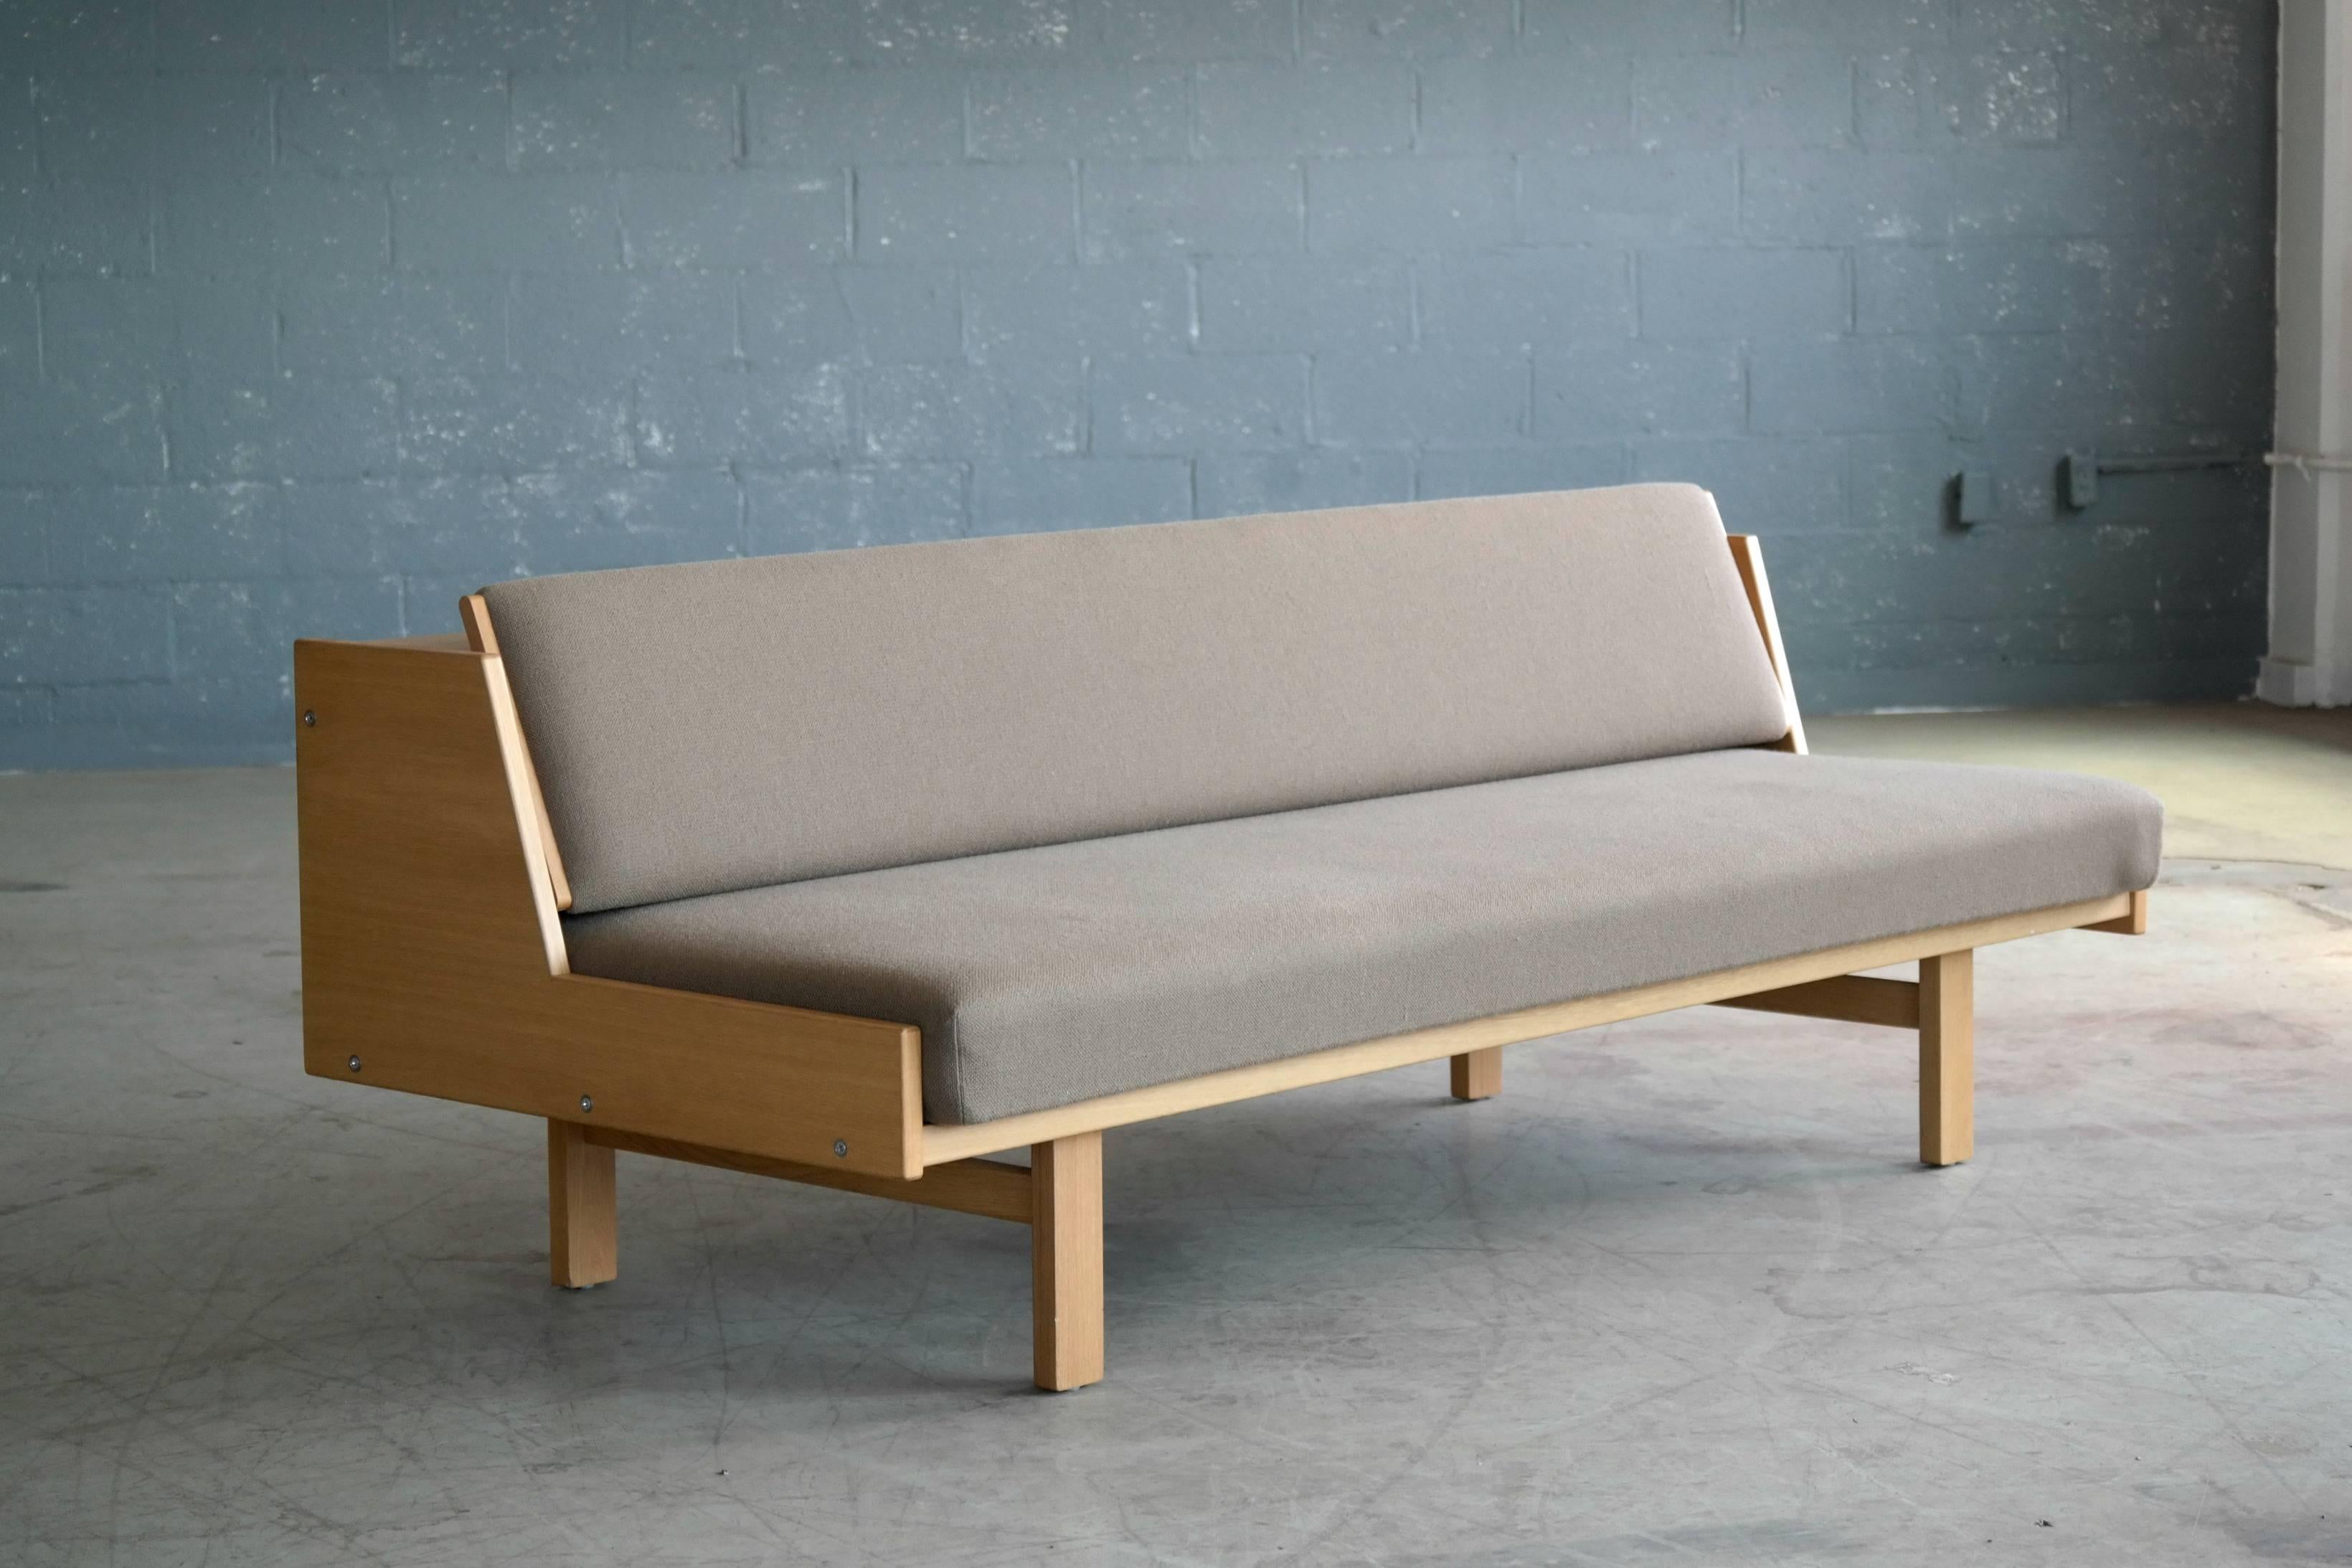 Hans Wegner's iconic daybed designed in 1954 and produced by GETAMA in Denmark. The daybed is made from oak and has it's original mattress covered in a grey wool by Kvadrat. The backrest which also serves as blanket storage lifts up to allow the